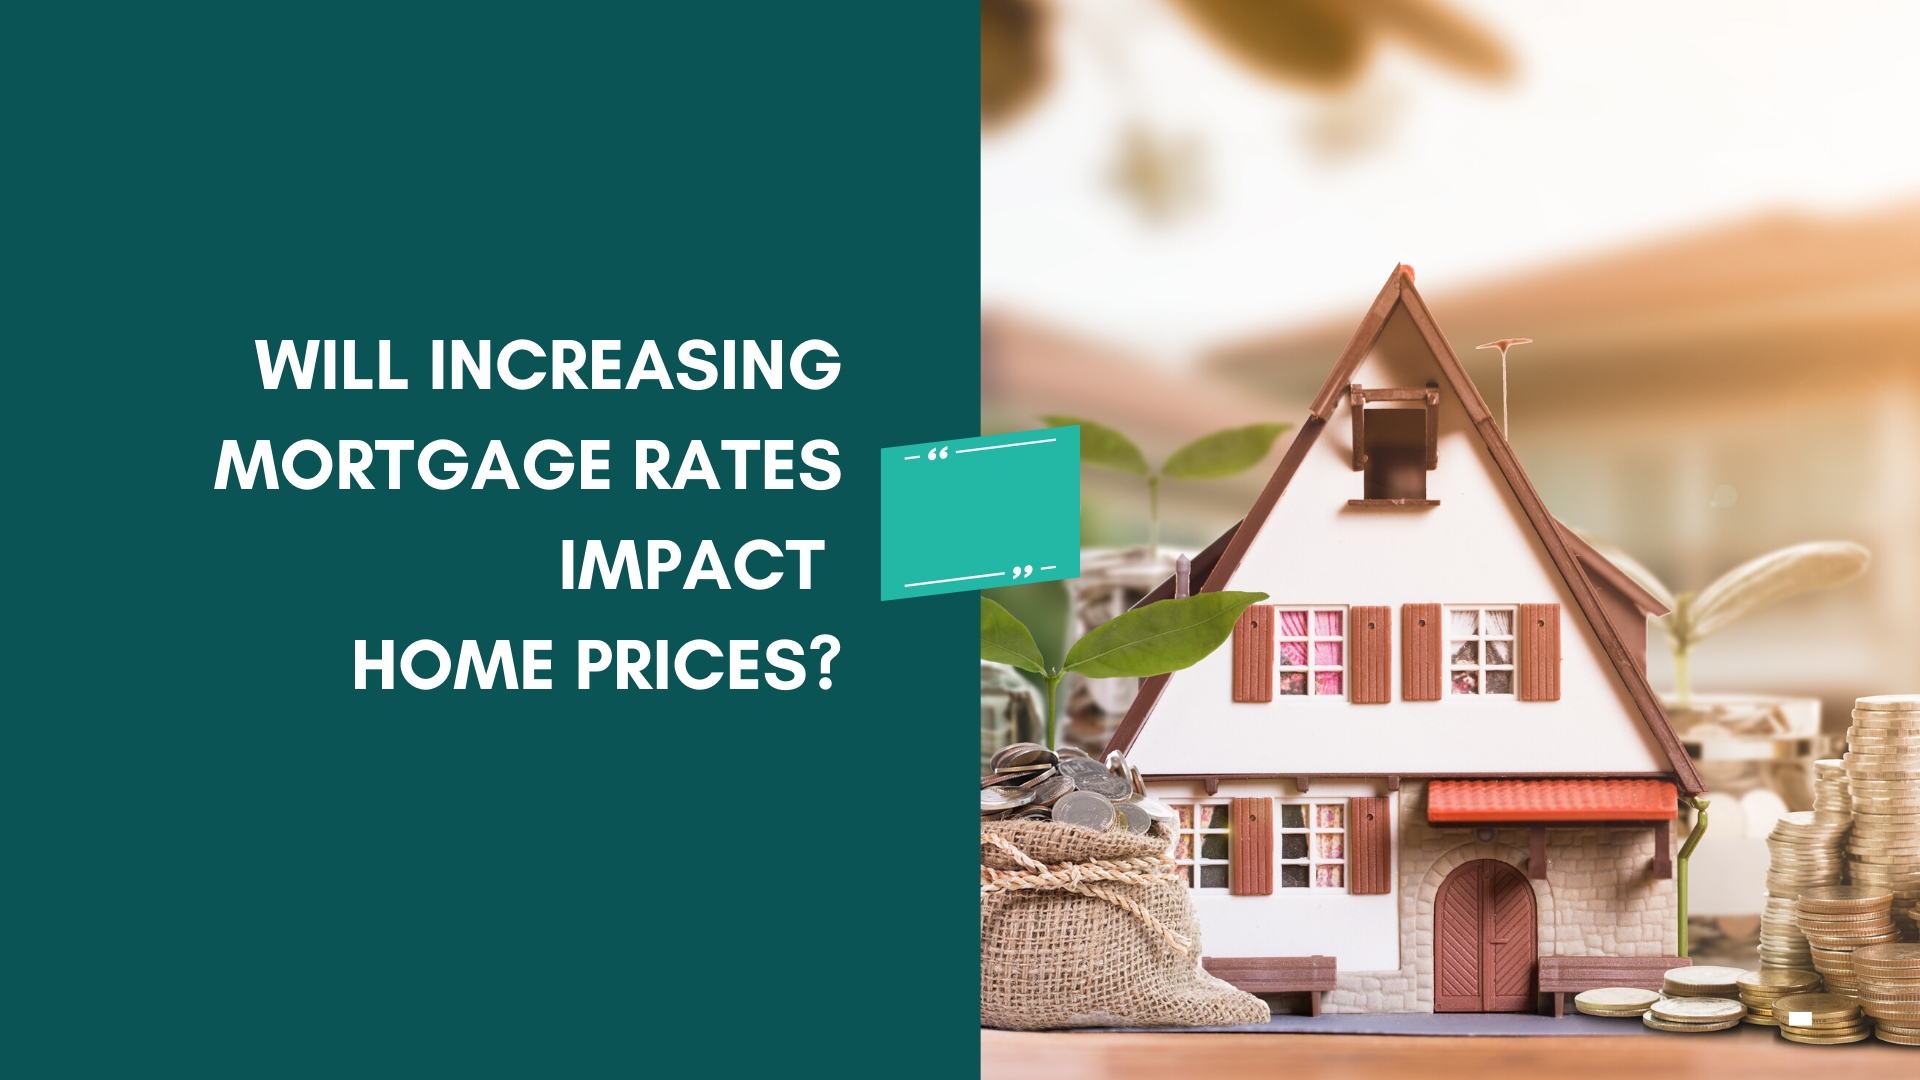 Will Increasing Mortgage Rates Impact Home Prices